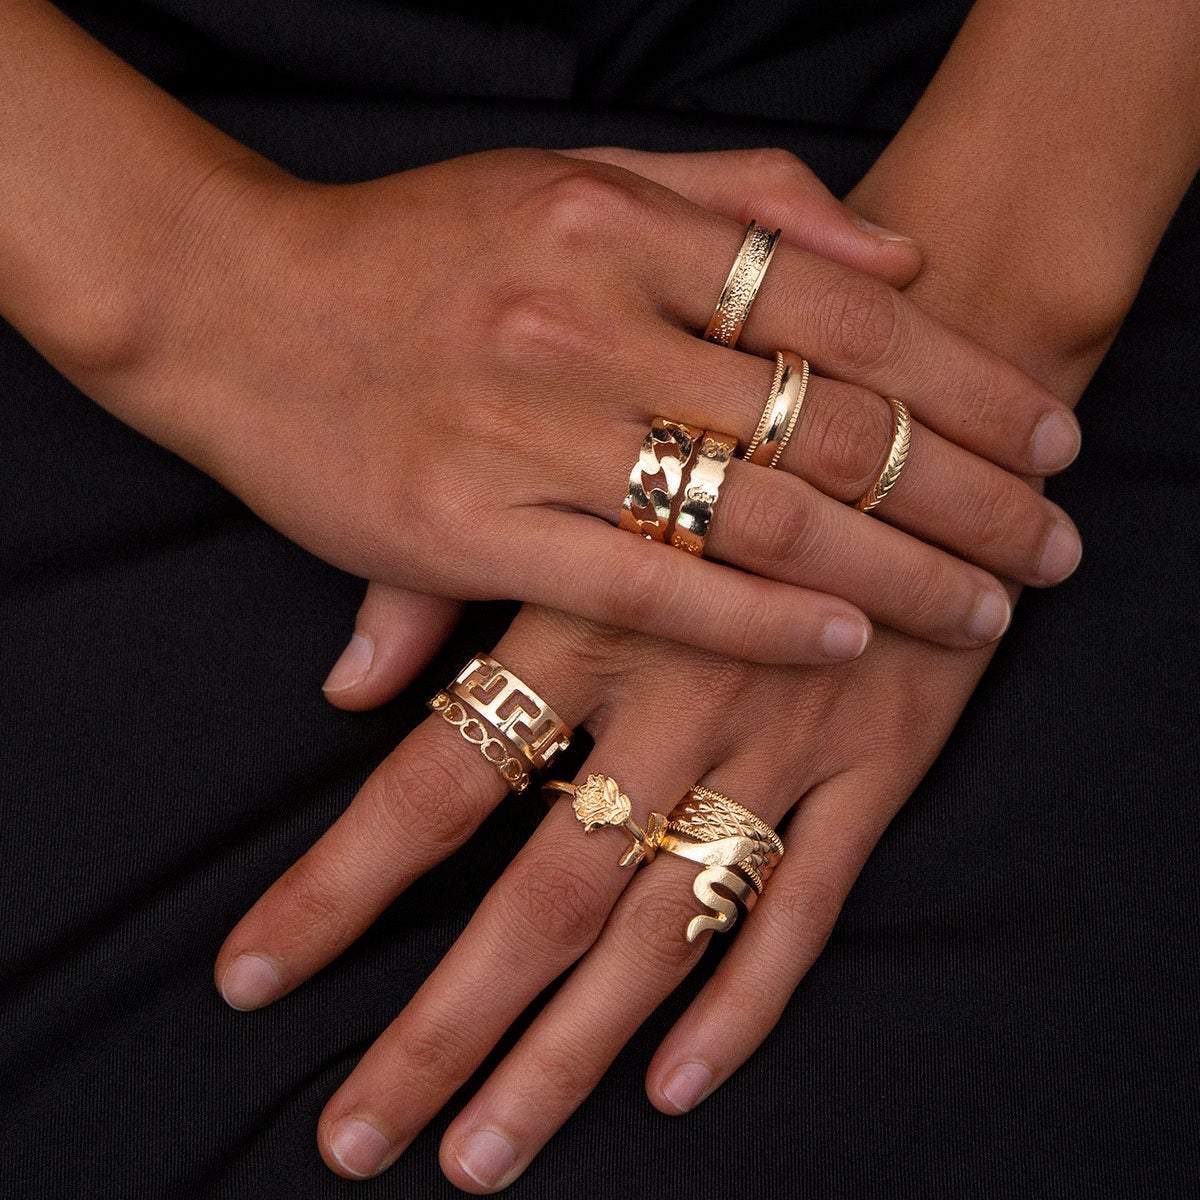 Chic 11 Pieces Gold Tone Metal Ring Set